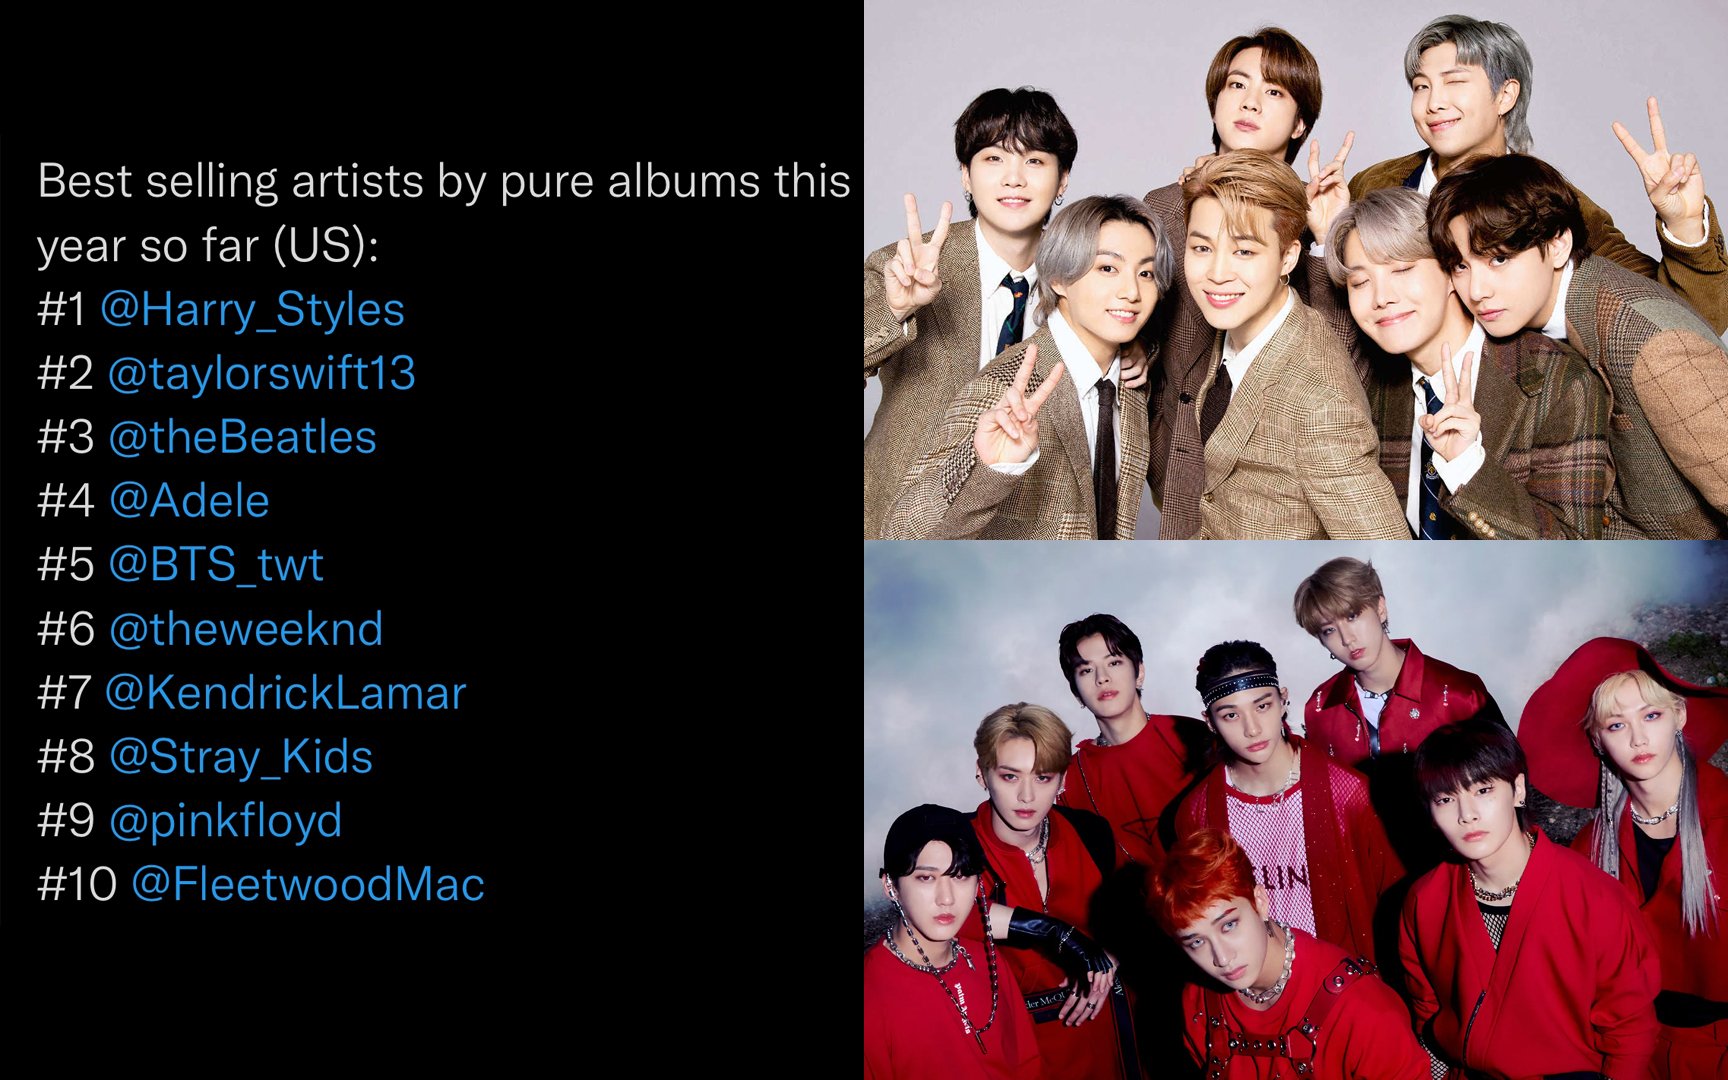 Picket Separate Hornet BTS and Stray Kids listed on the top ten best selling artists by pure album  sales this year in the U.S. | allkpop